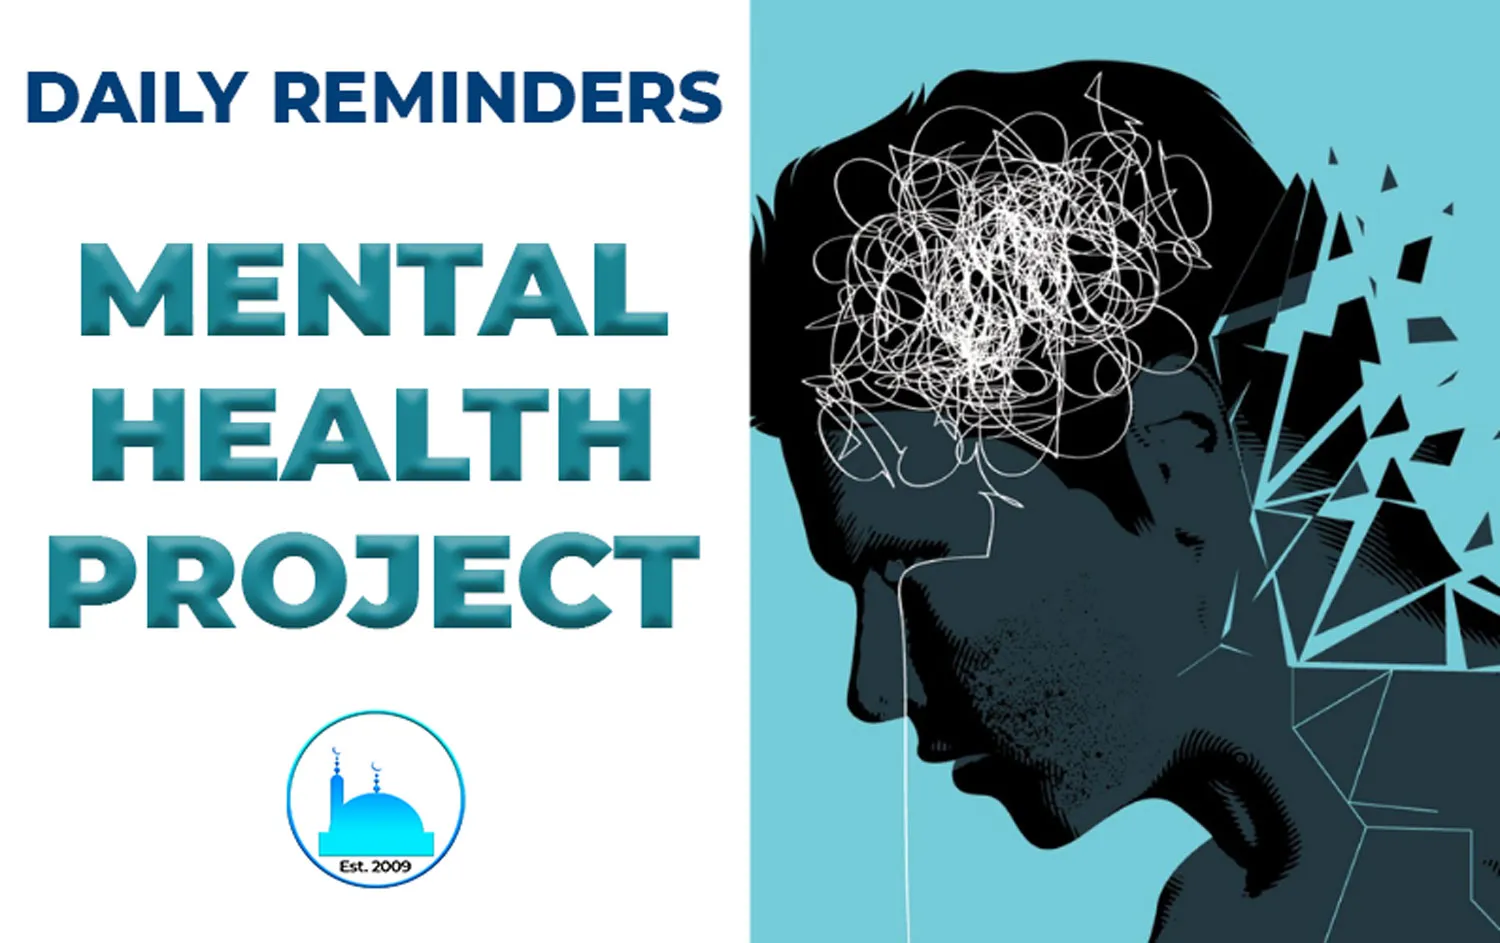 Daily Reminders mental health project